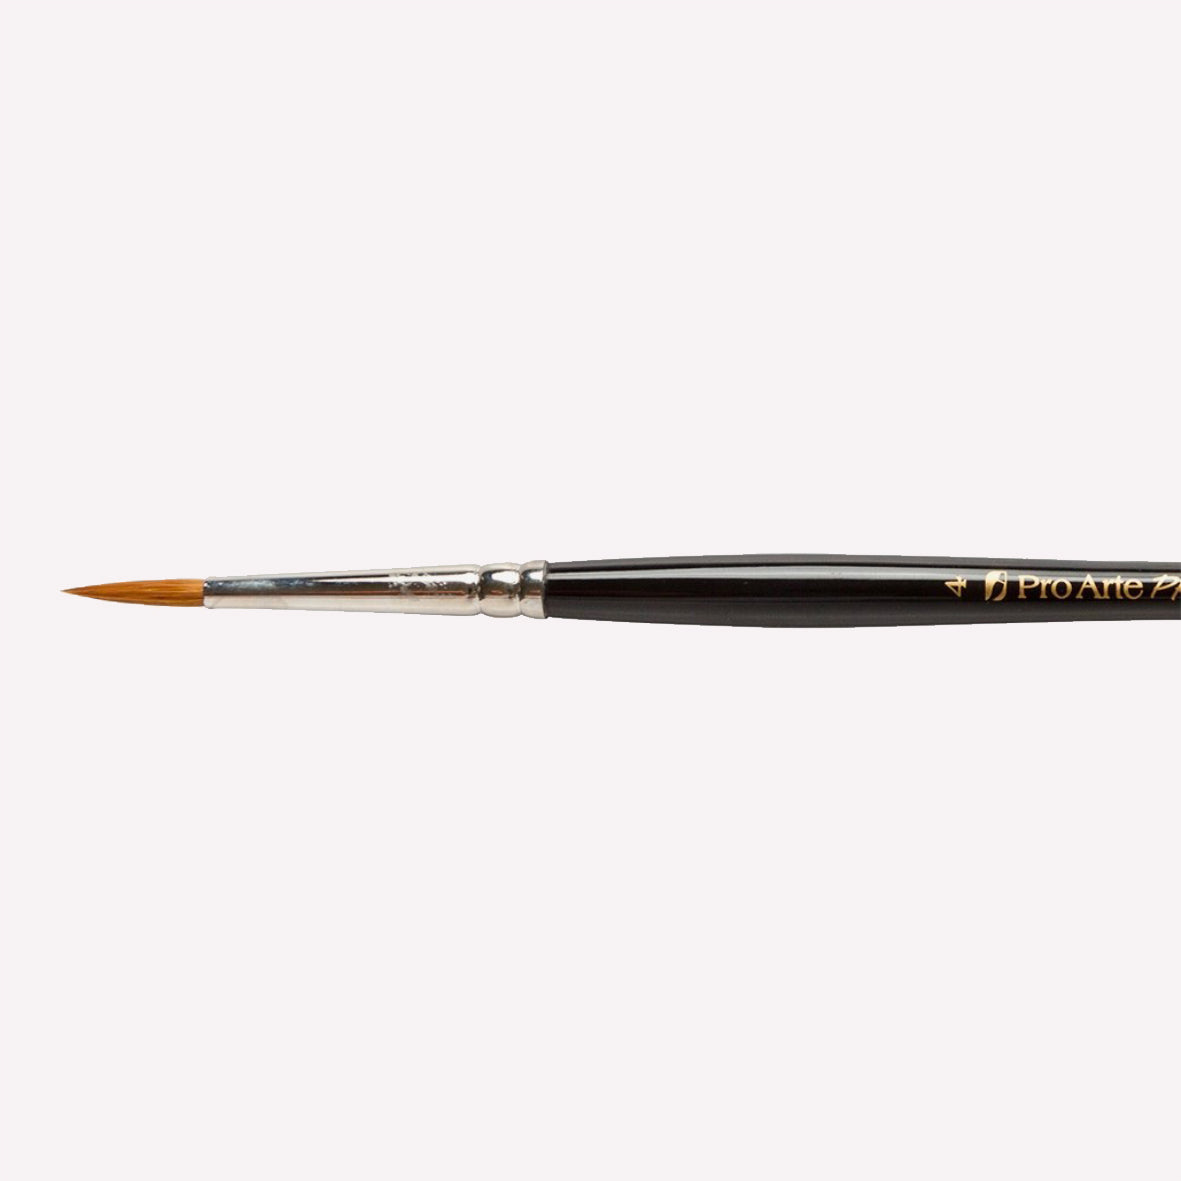 Pro Arte’s Prolene round paintbrush in size 101-4. Brushes have synthetic bristles, an ergonomic black handle and a silver ferrule. 